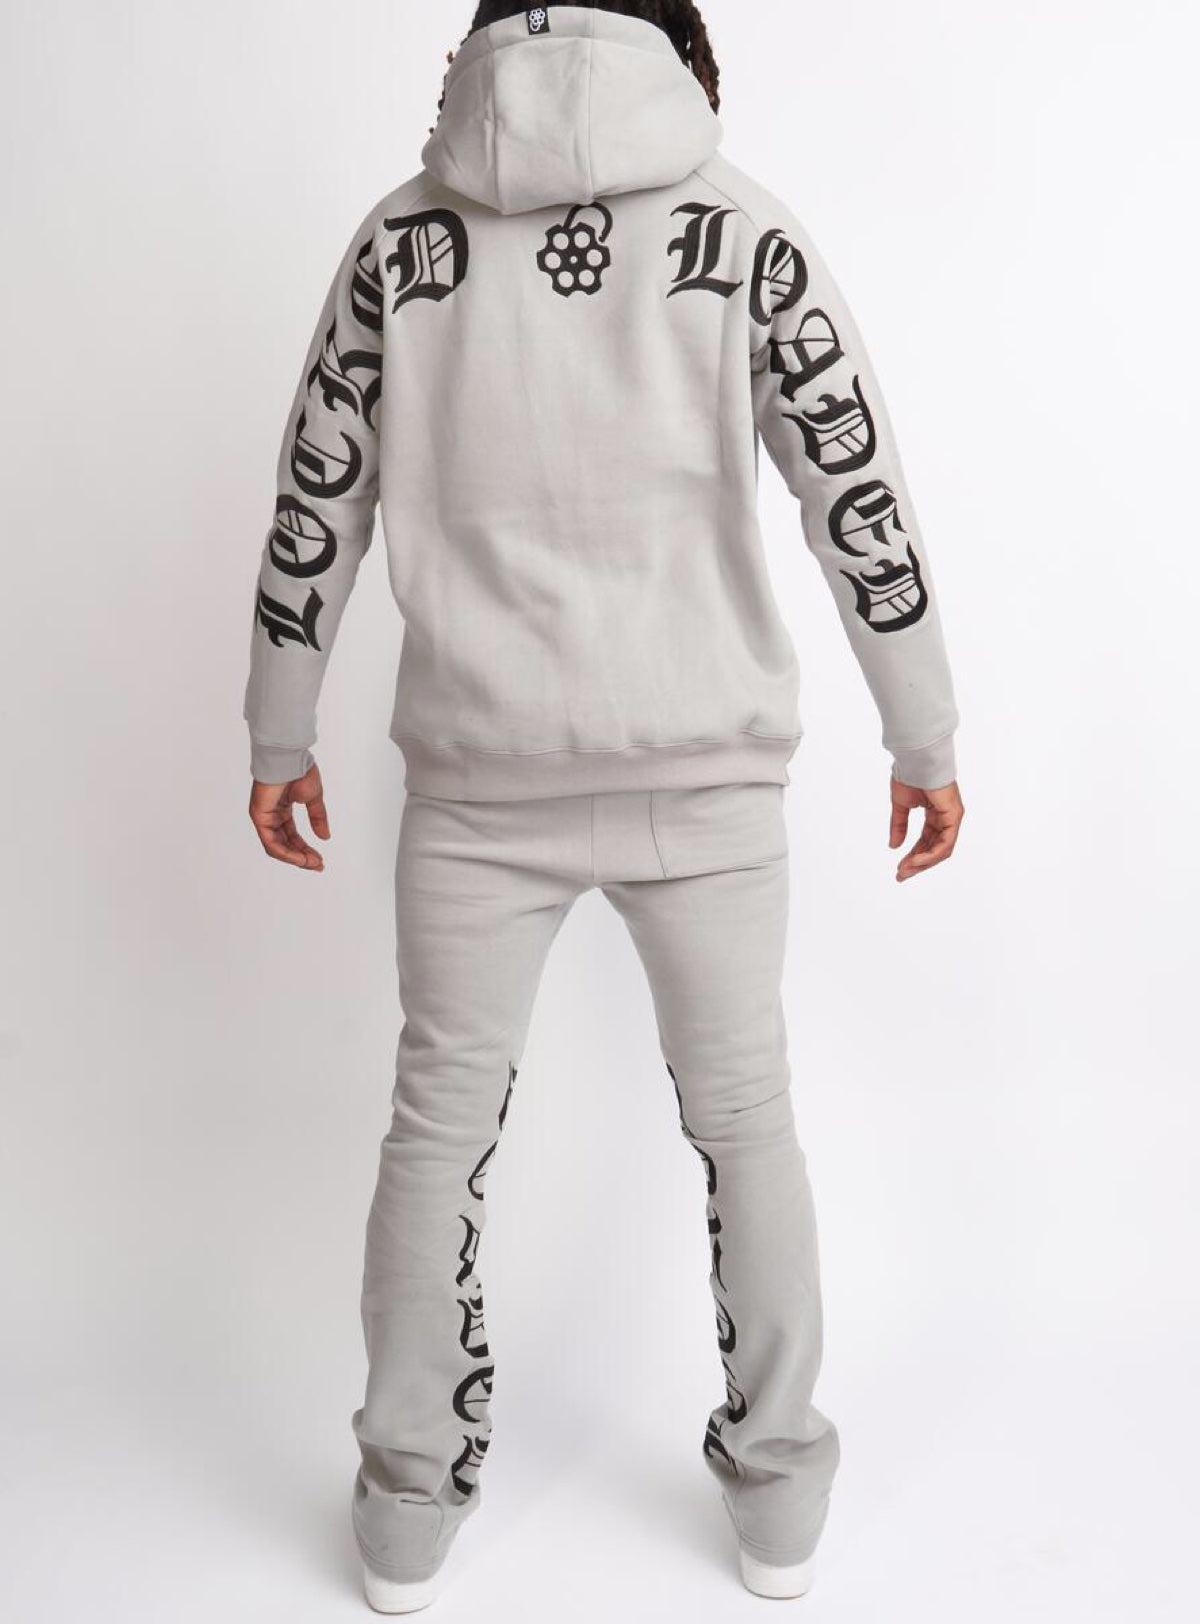 Locked & Loaded Sweatsuit - Chamber - Grey And Black - 353